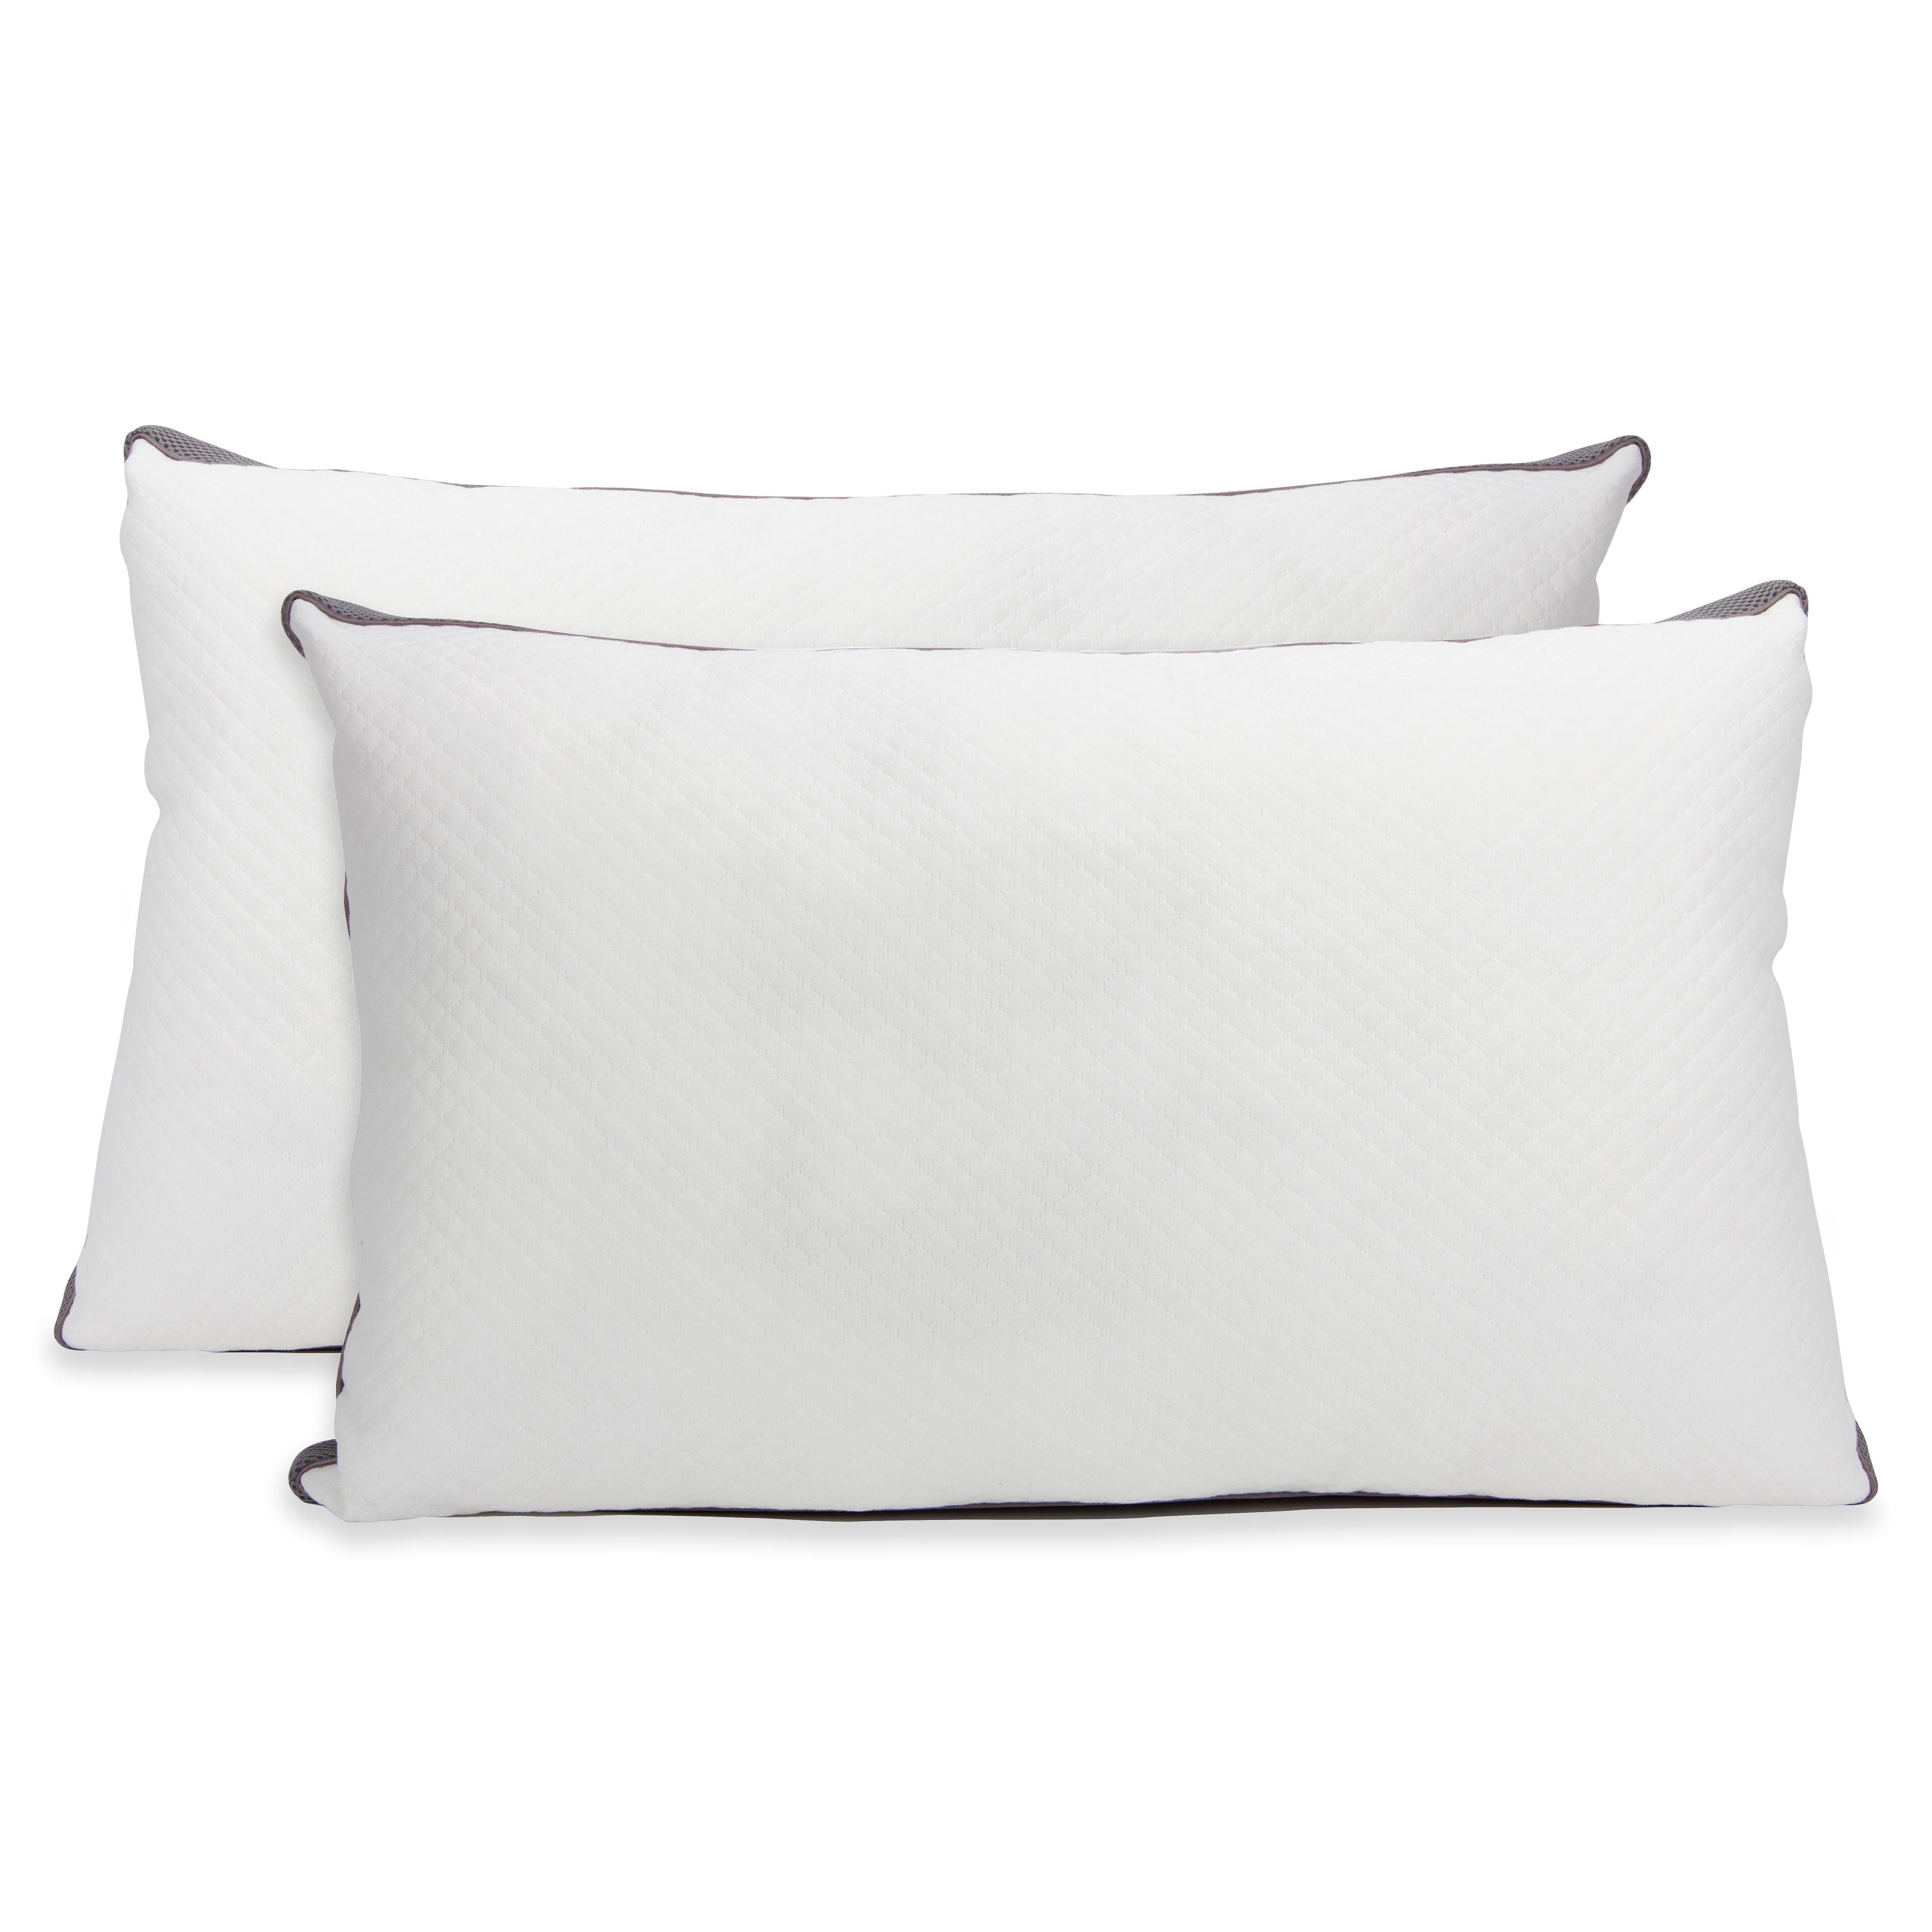 Cheer Collection Memory Foam Ventilated Cooling Gel Pillow - White